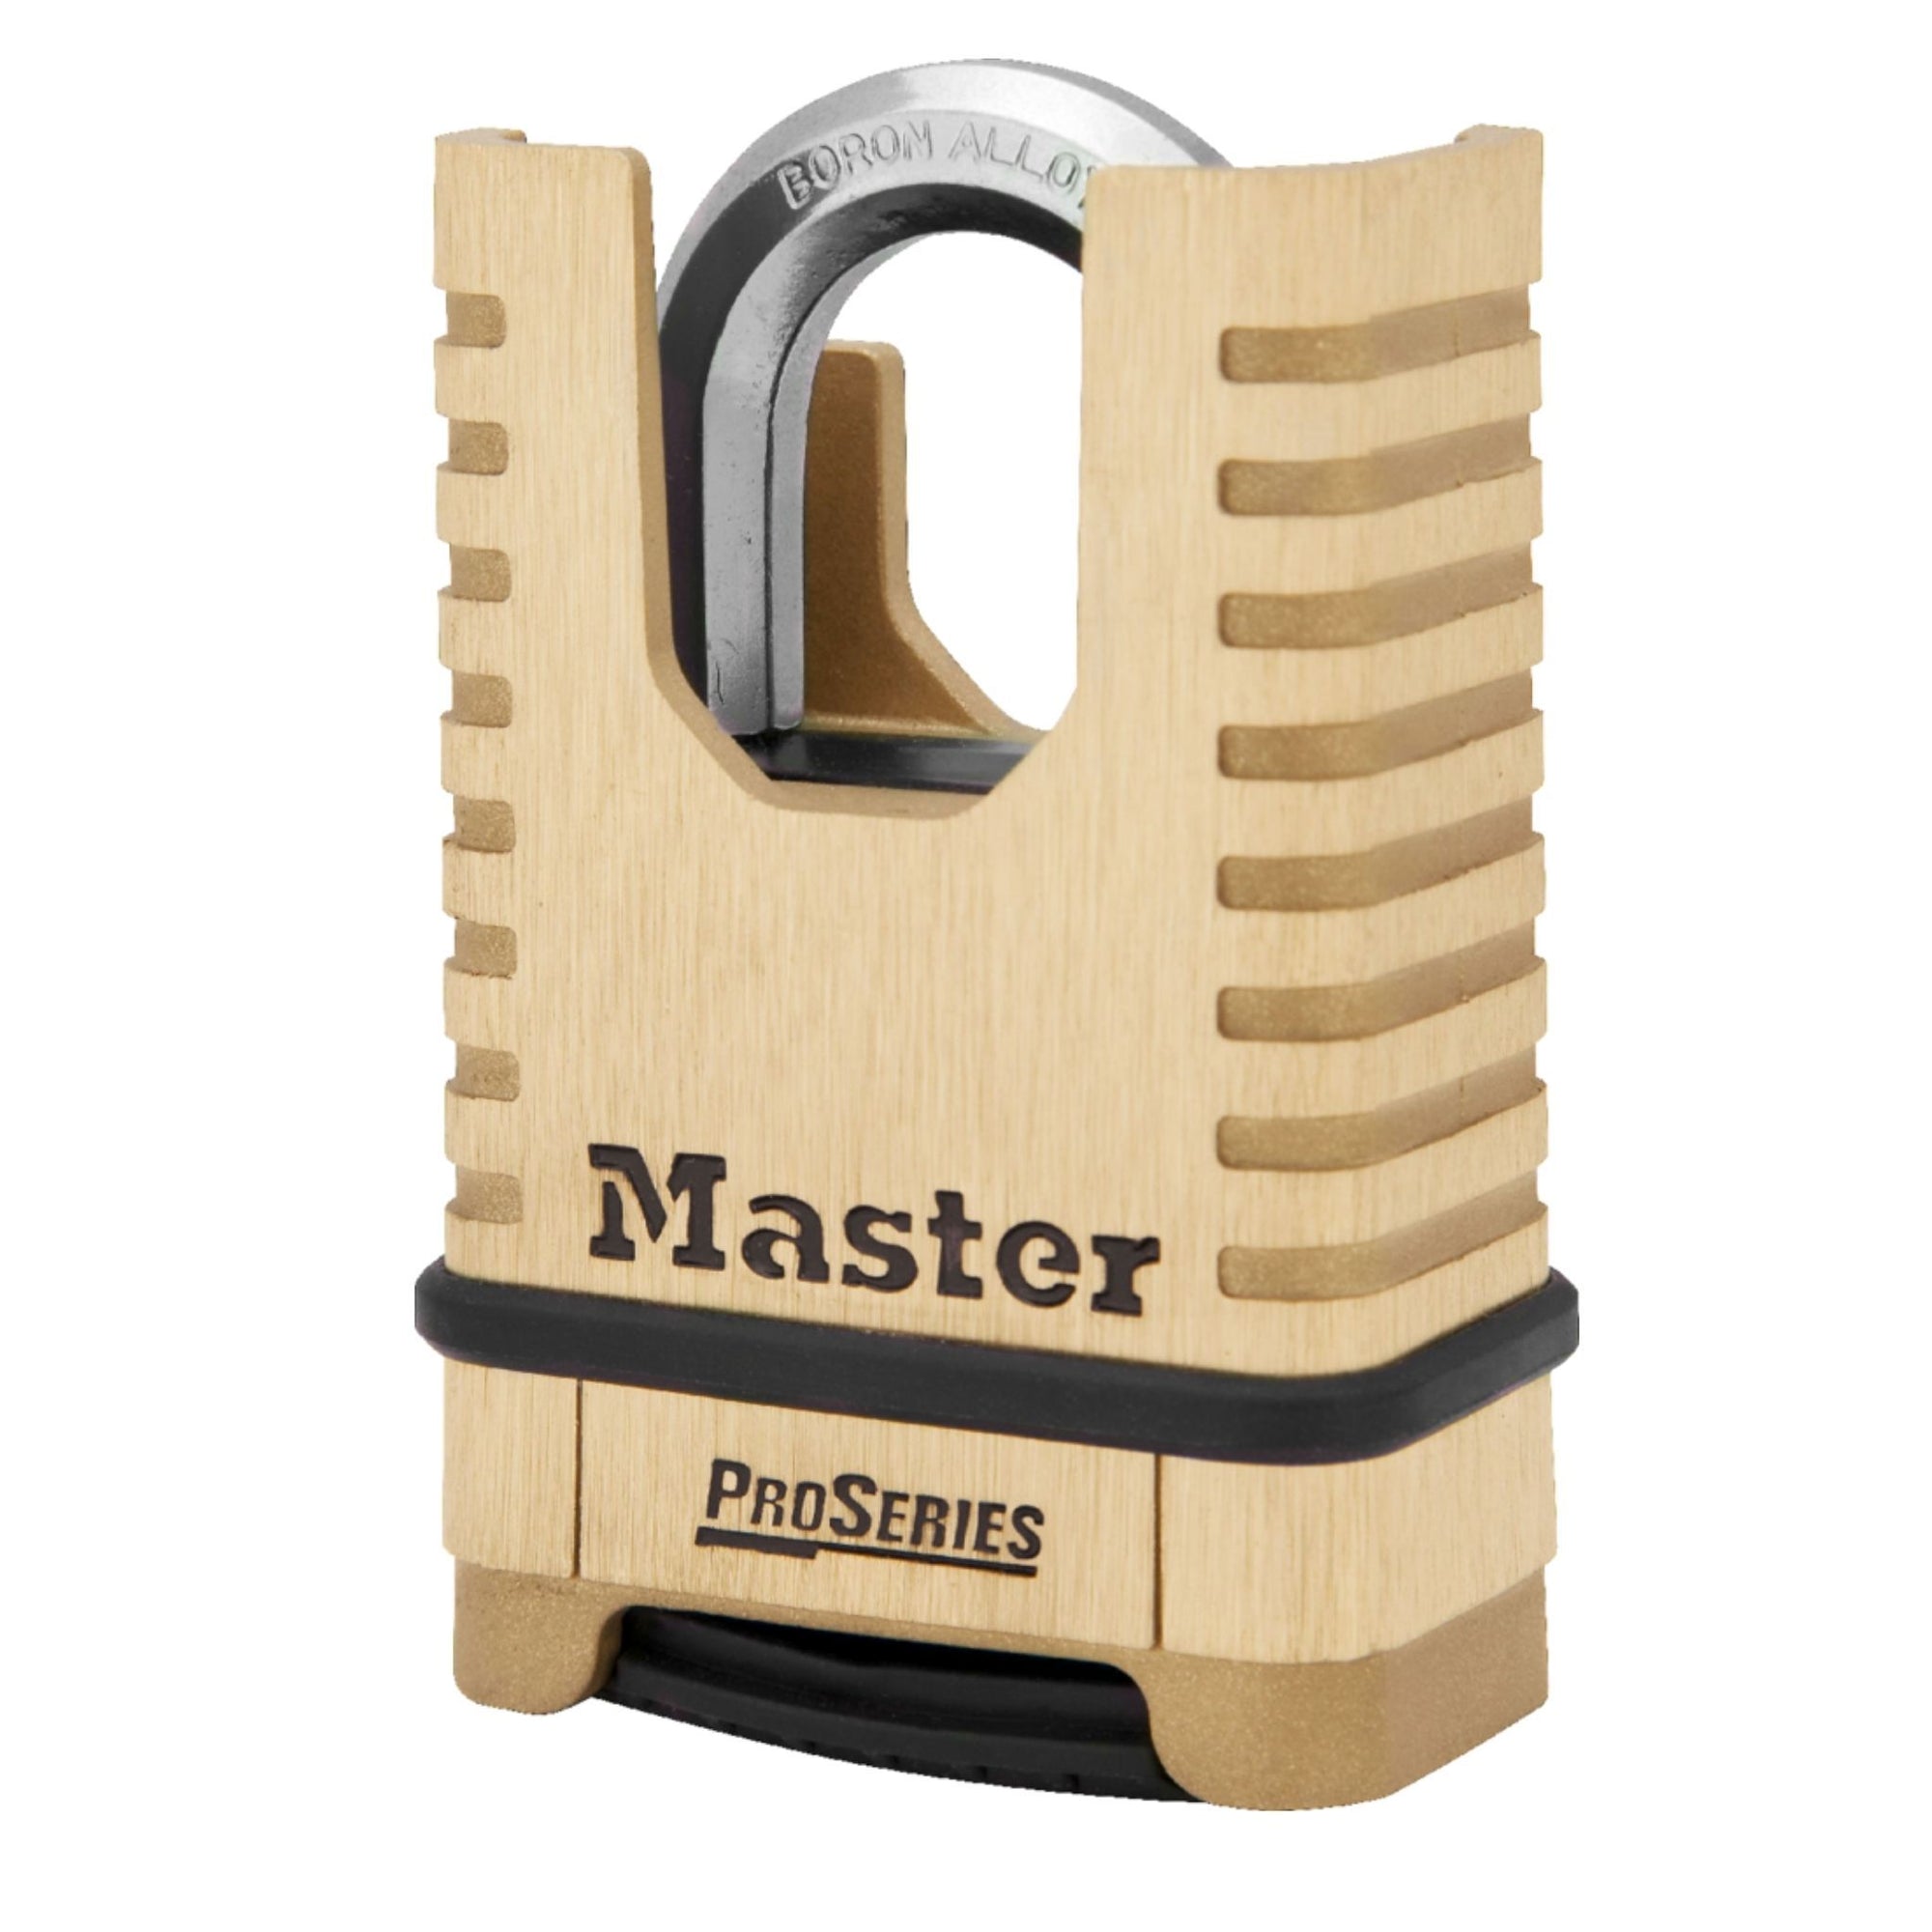 Master Lock 1177D Pro Series Padlock with Shrouded Shackle - The Lock Source